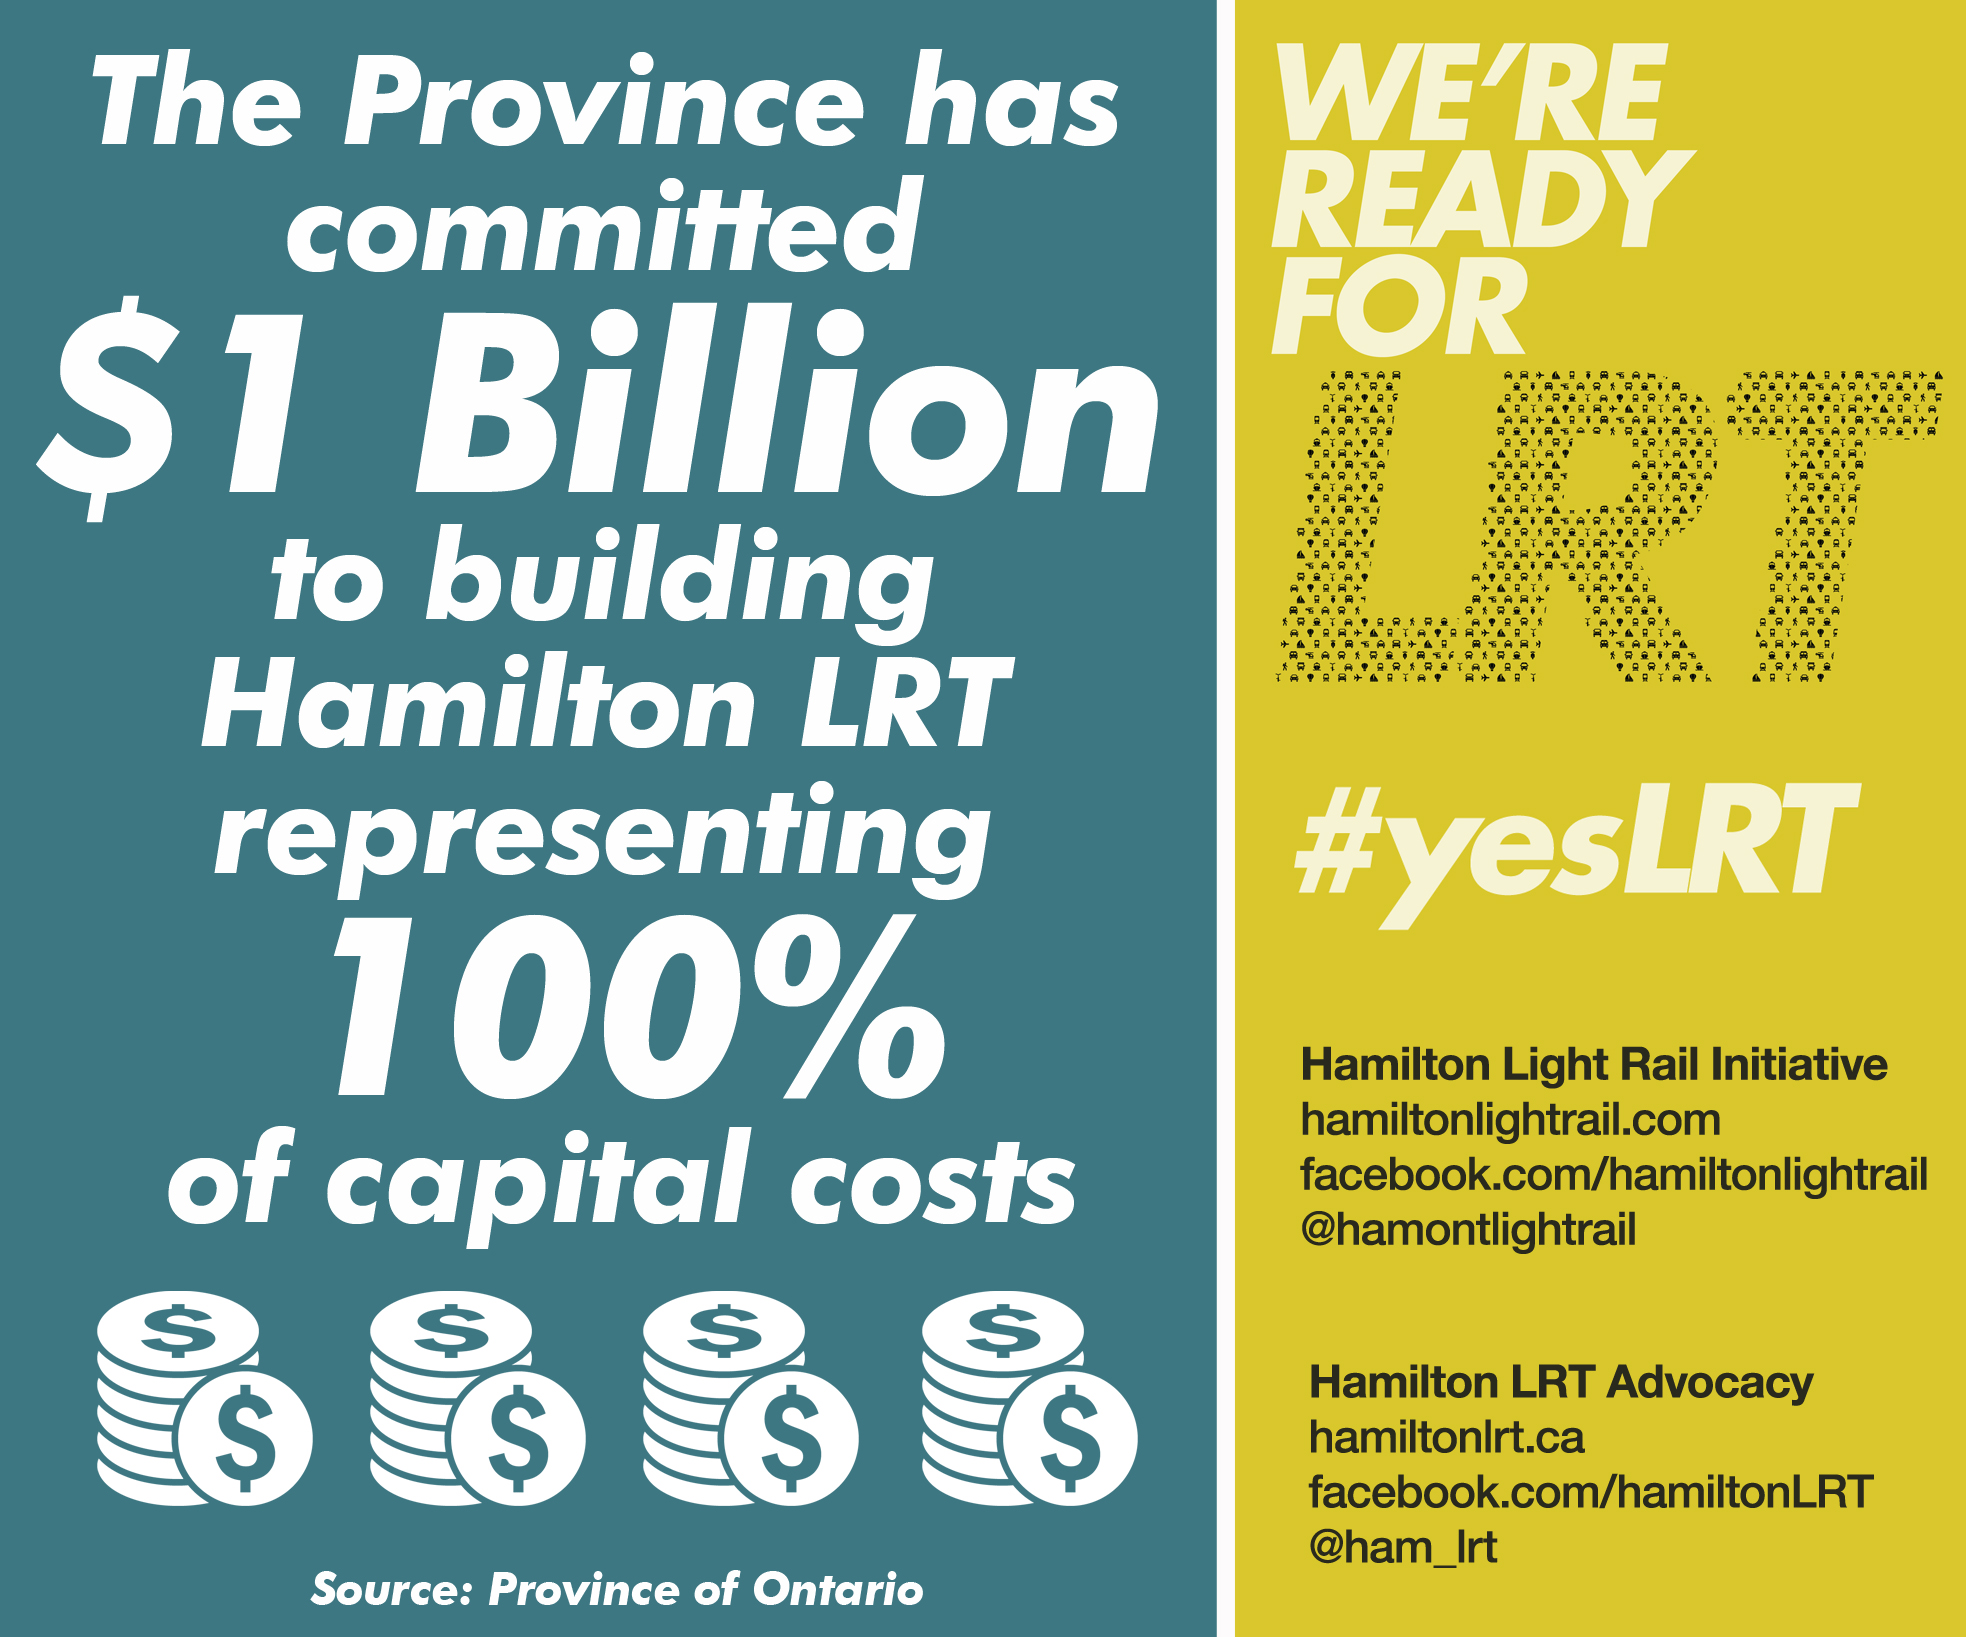 LRT Fact: The Province has committed $1 billion to building Hamilton LRT, representing 100% of capital costs